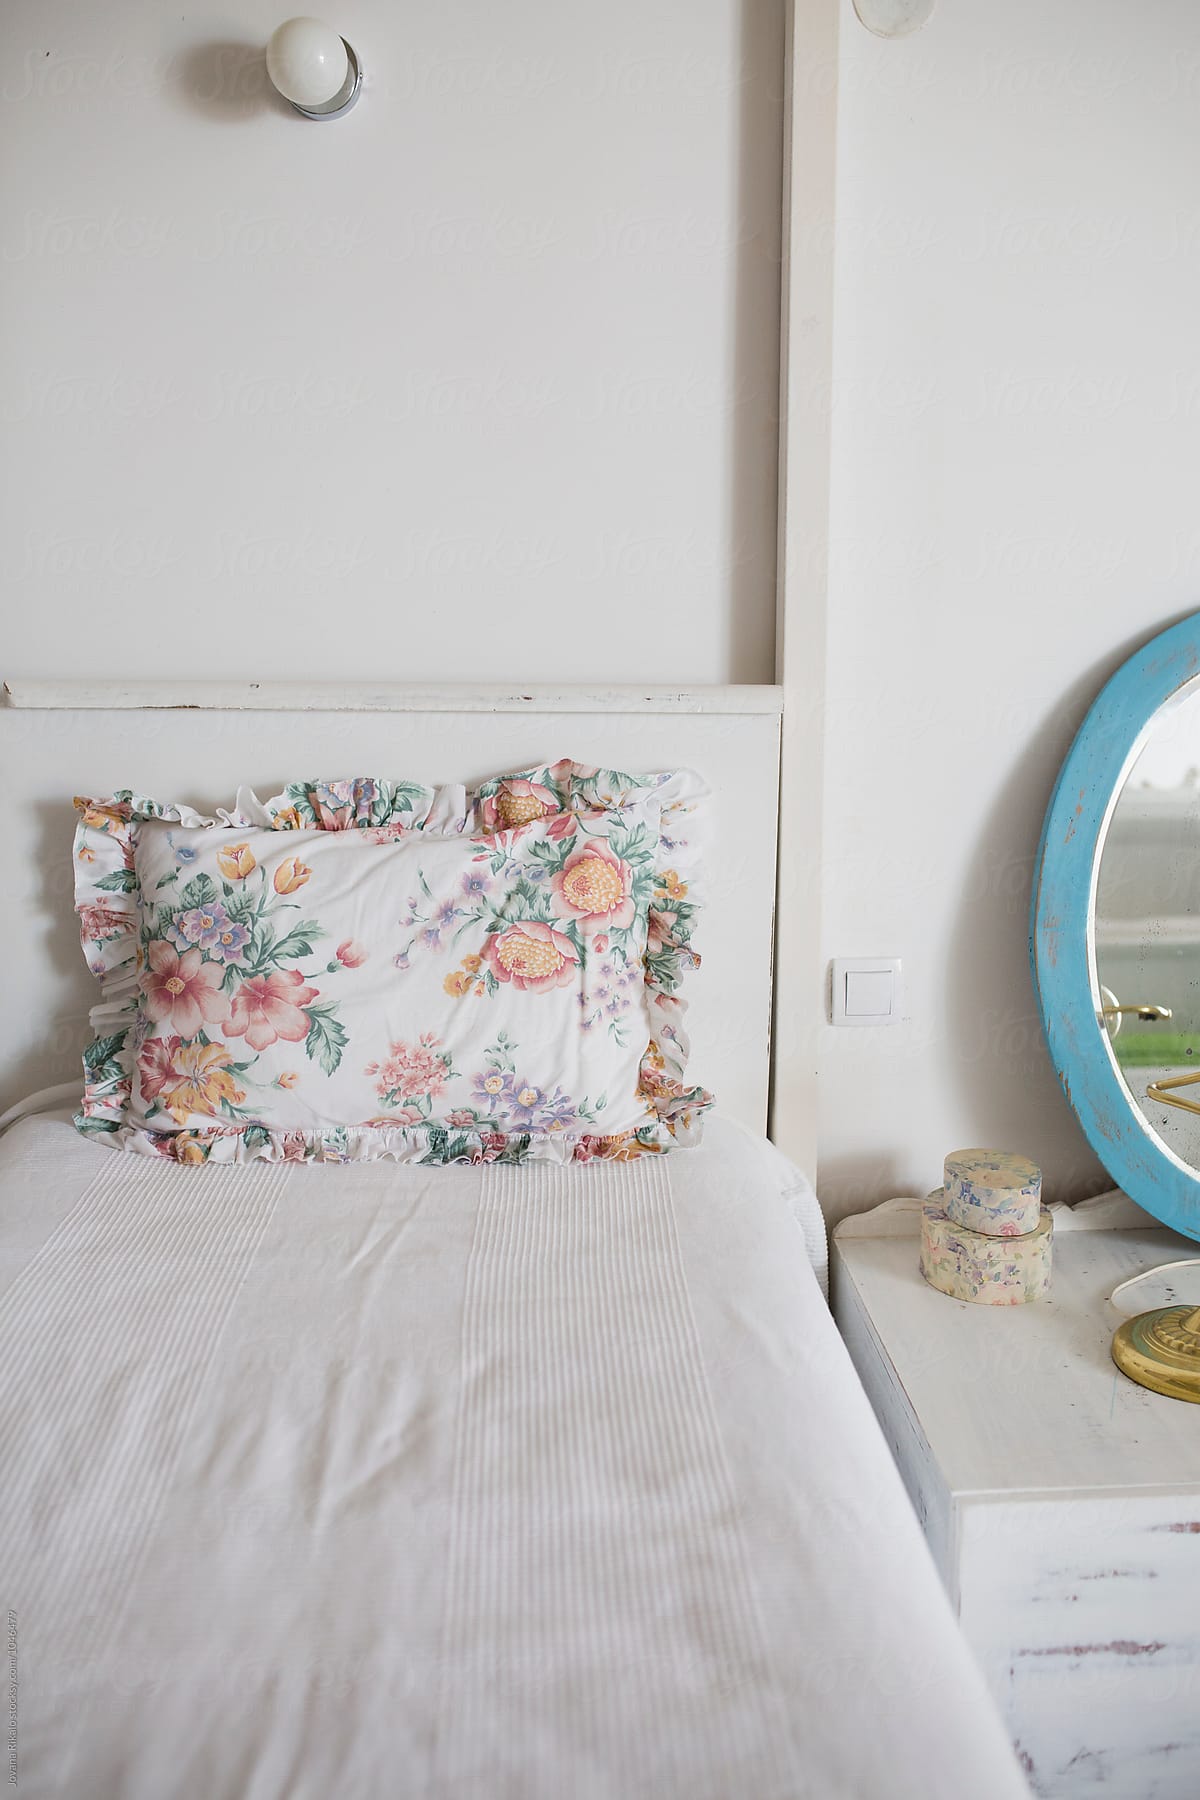 Bed and floral pillow